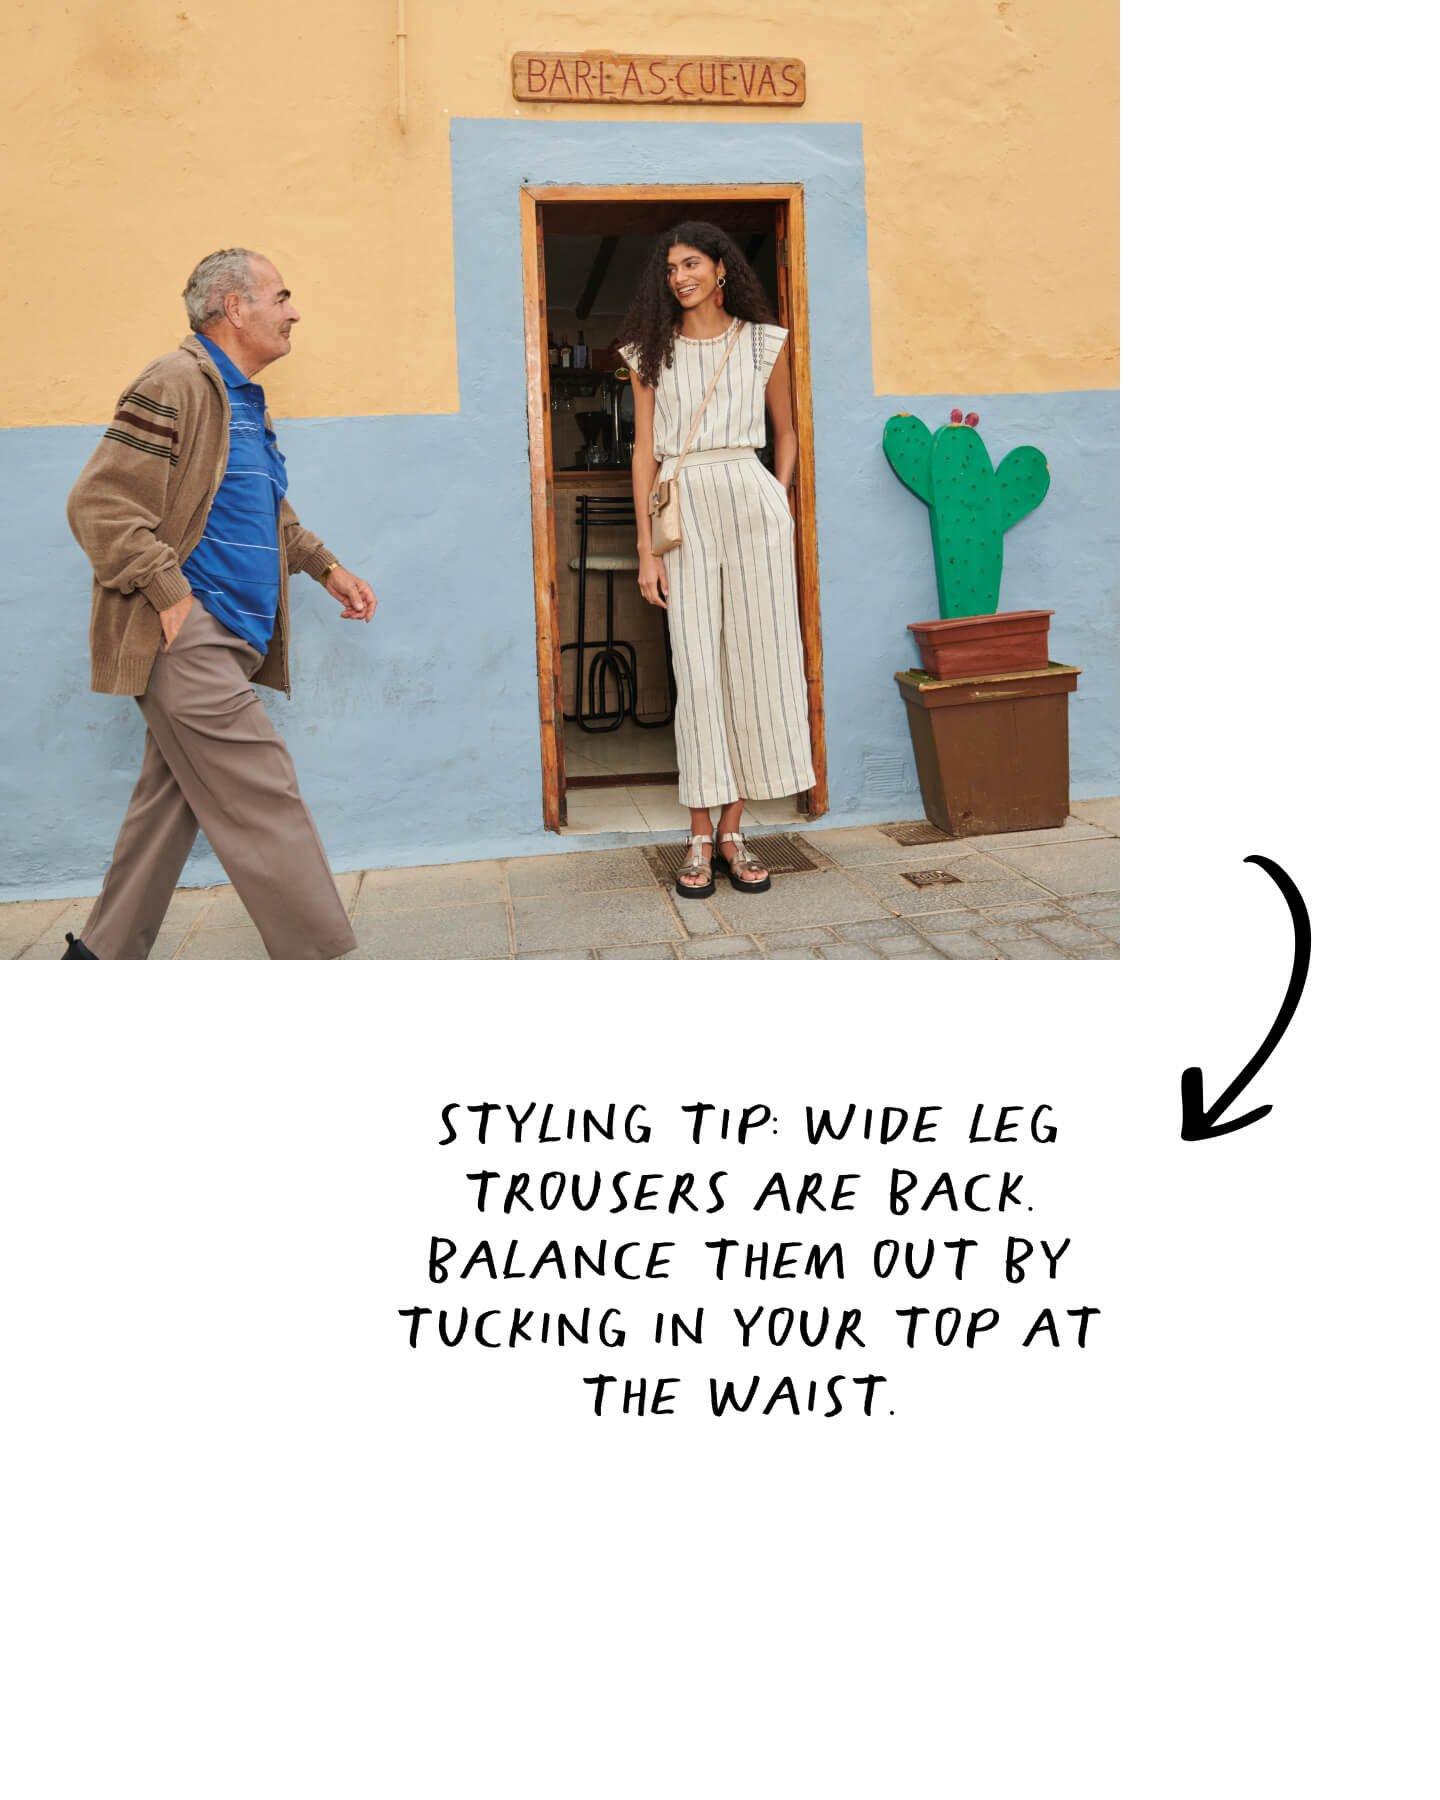 woman wearing linen and man walking past plus text